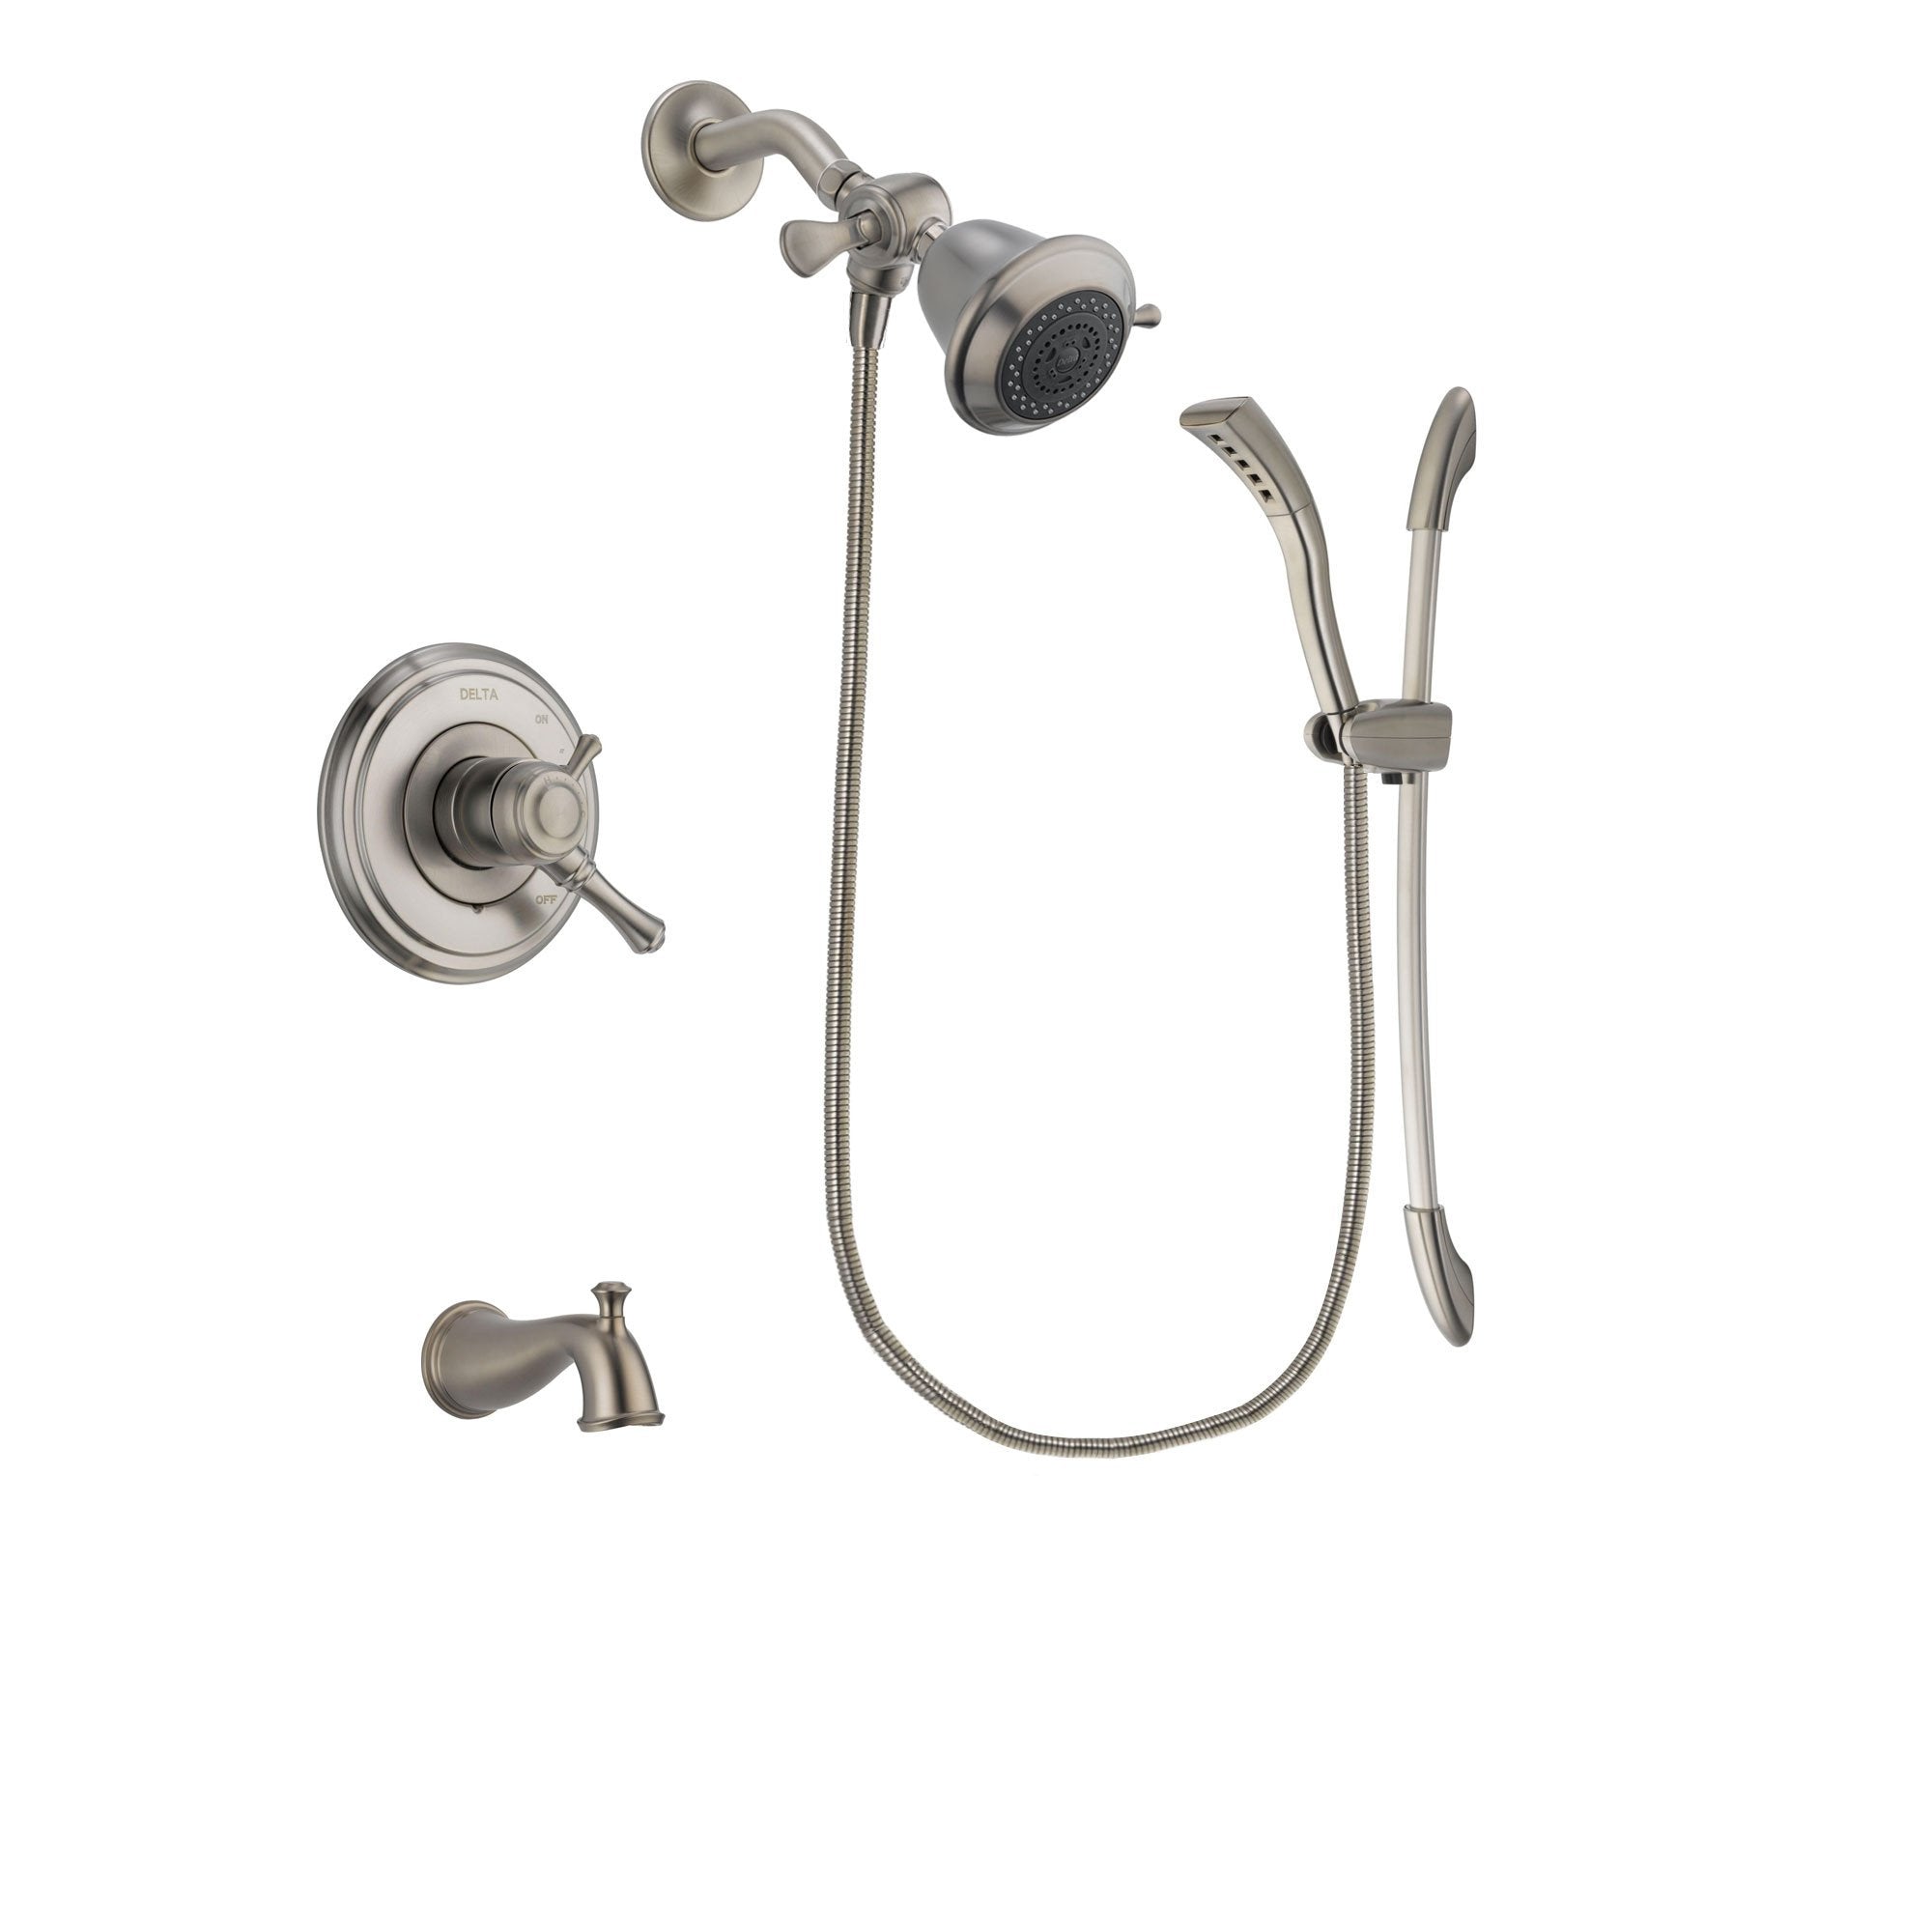 Delta Cassidy Stainless Steel Finish Dual Control Tub and Shower Faucet System Package with Shower Head and Handshower with Slide Bar Includes Rough-in Valve and Tub Spout DSP1409V